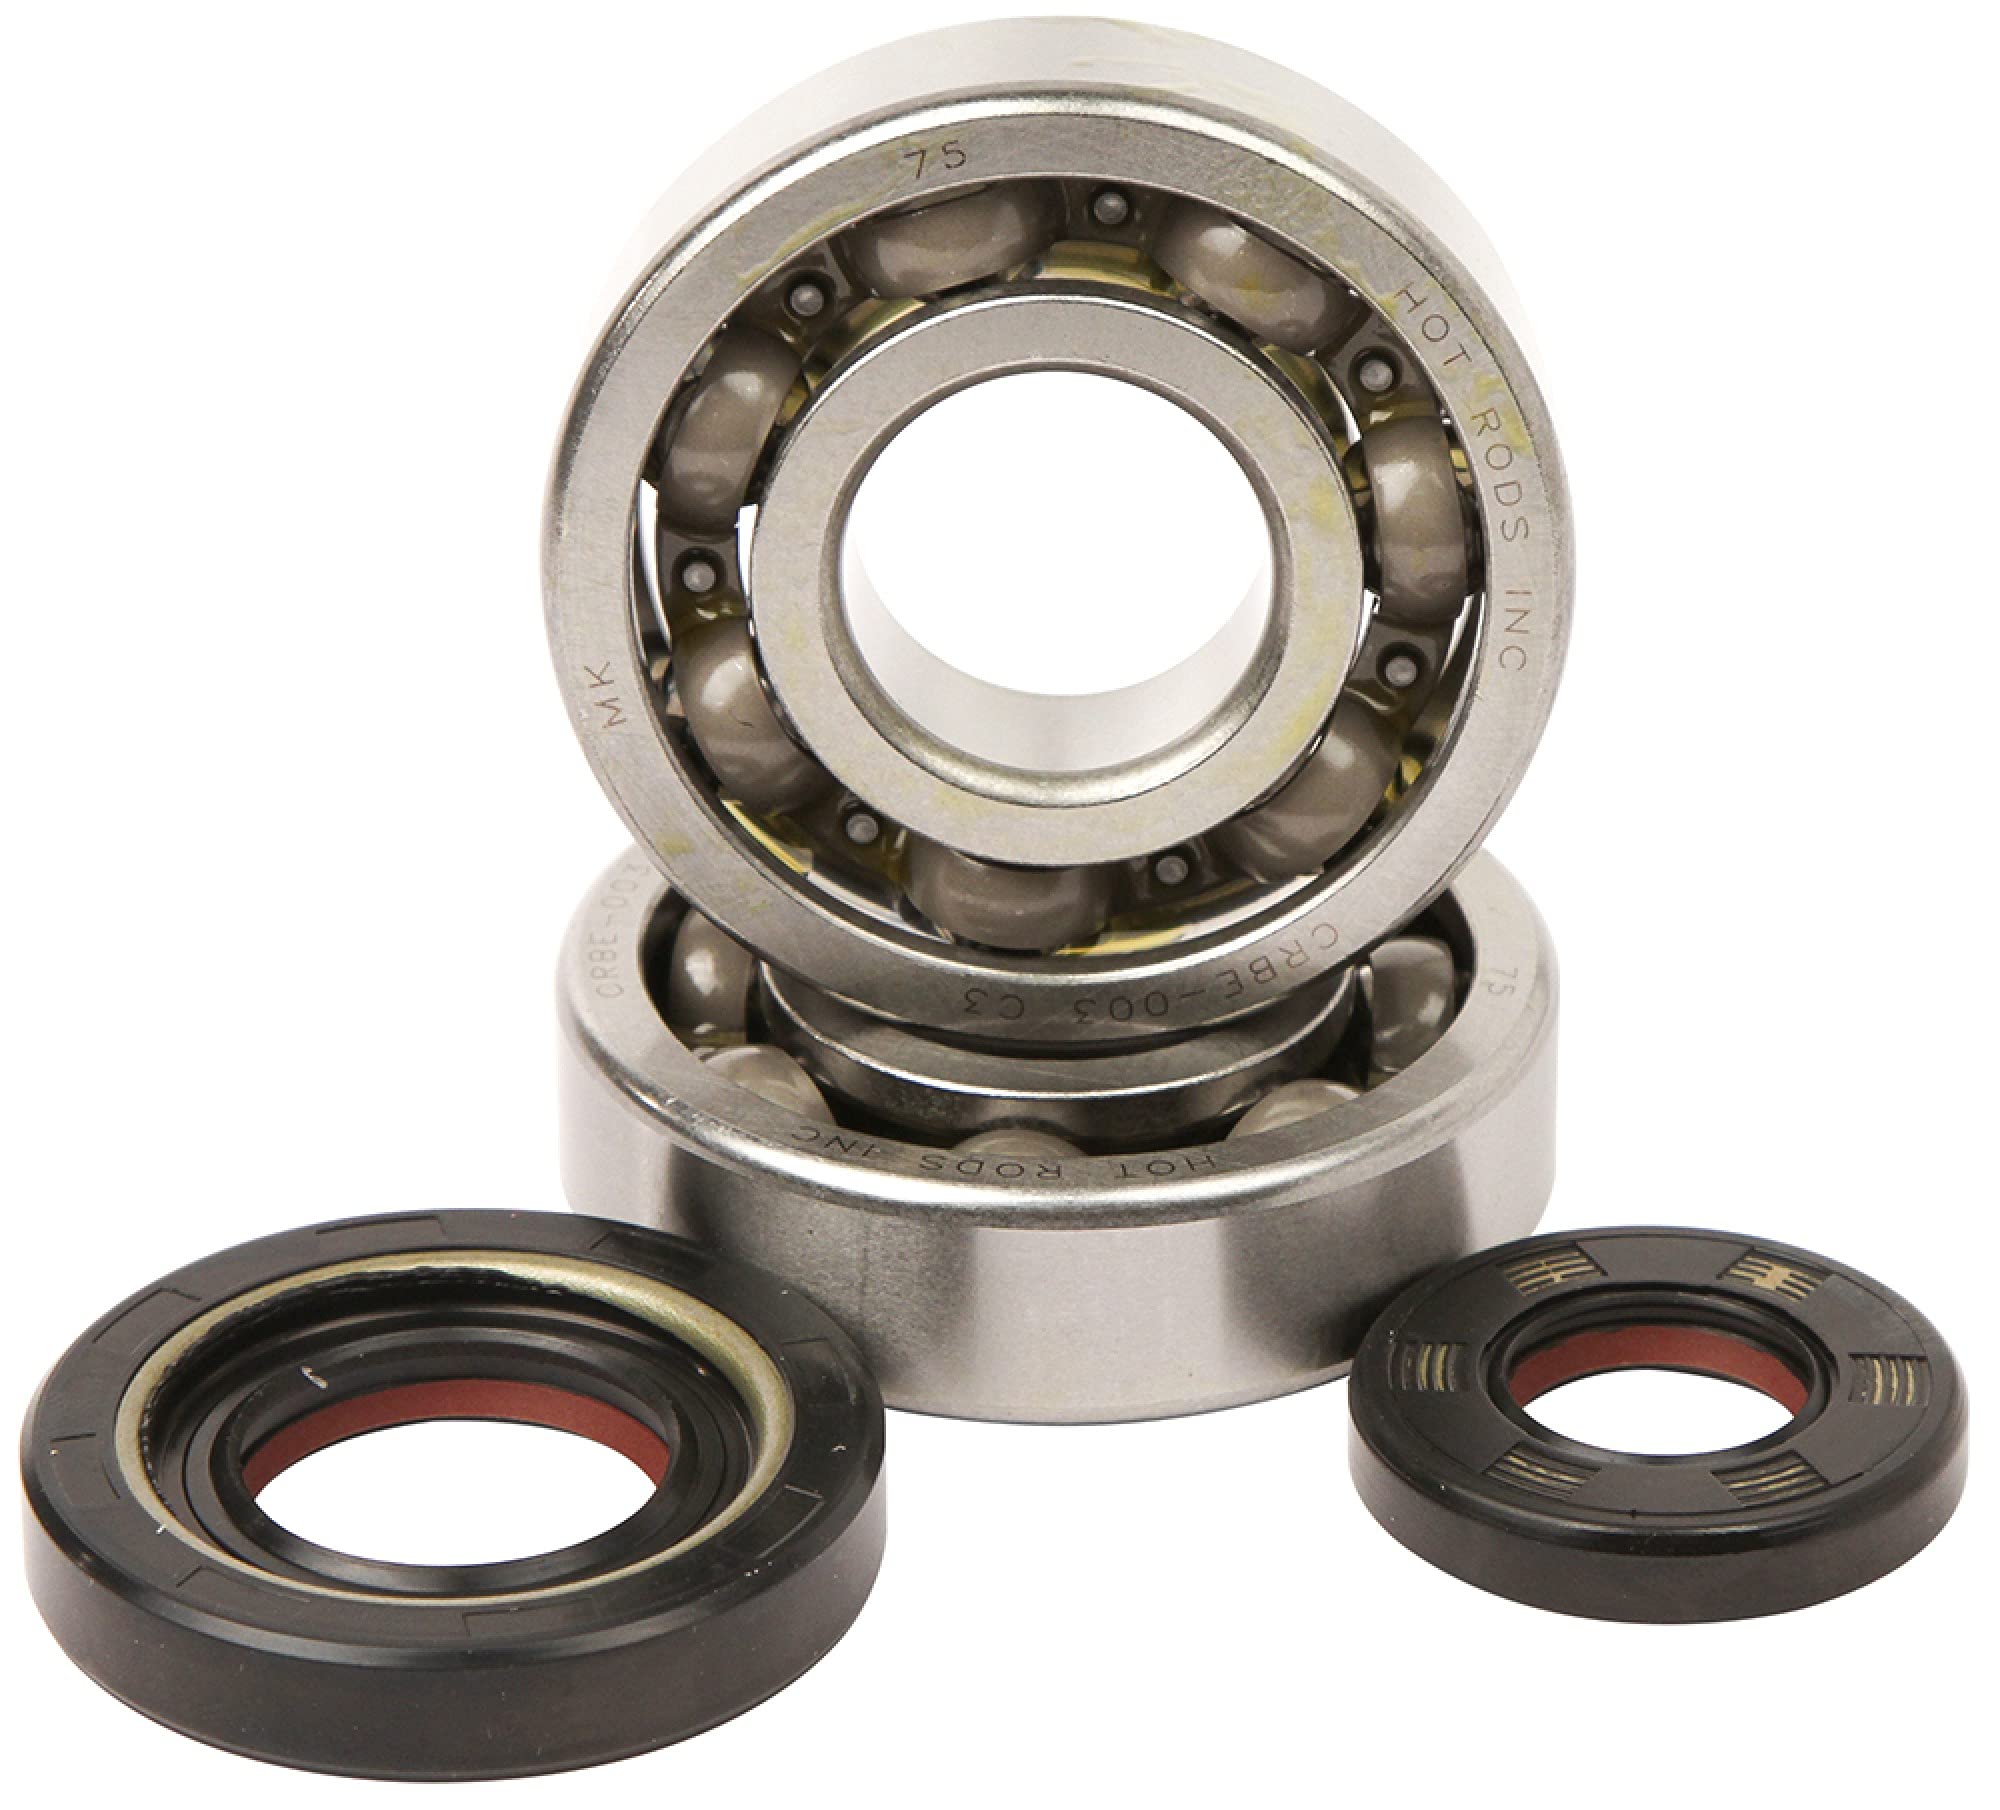 Hot Rods Main Bearing & Seal Kits K012 Compatible With/Replacement For Yamaha YZ 250 2001-2019, YZ 250 X 2016-2019